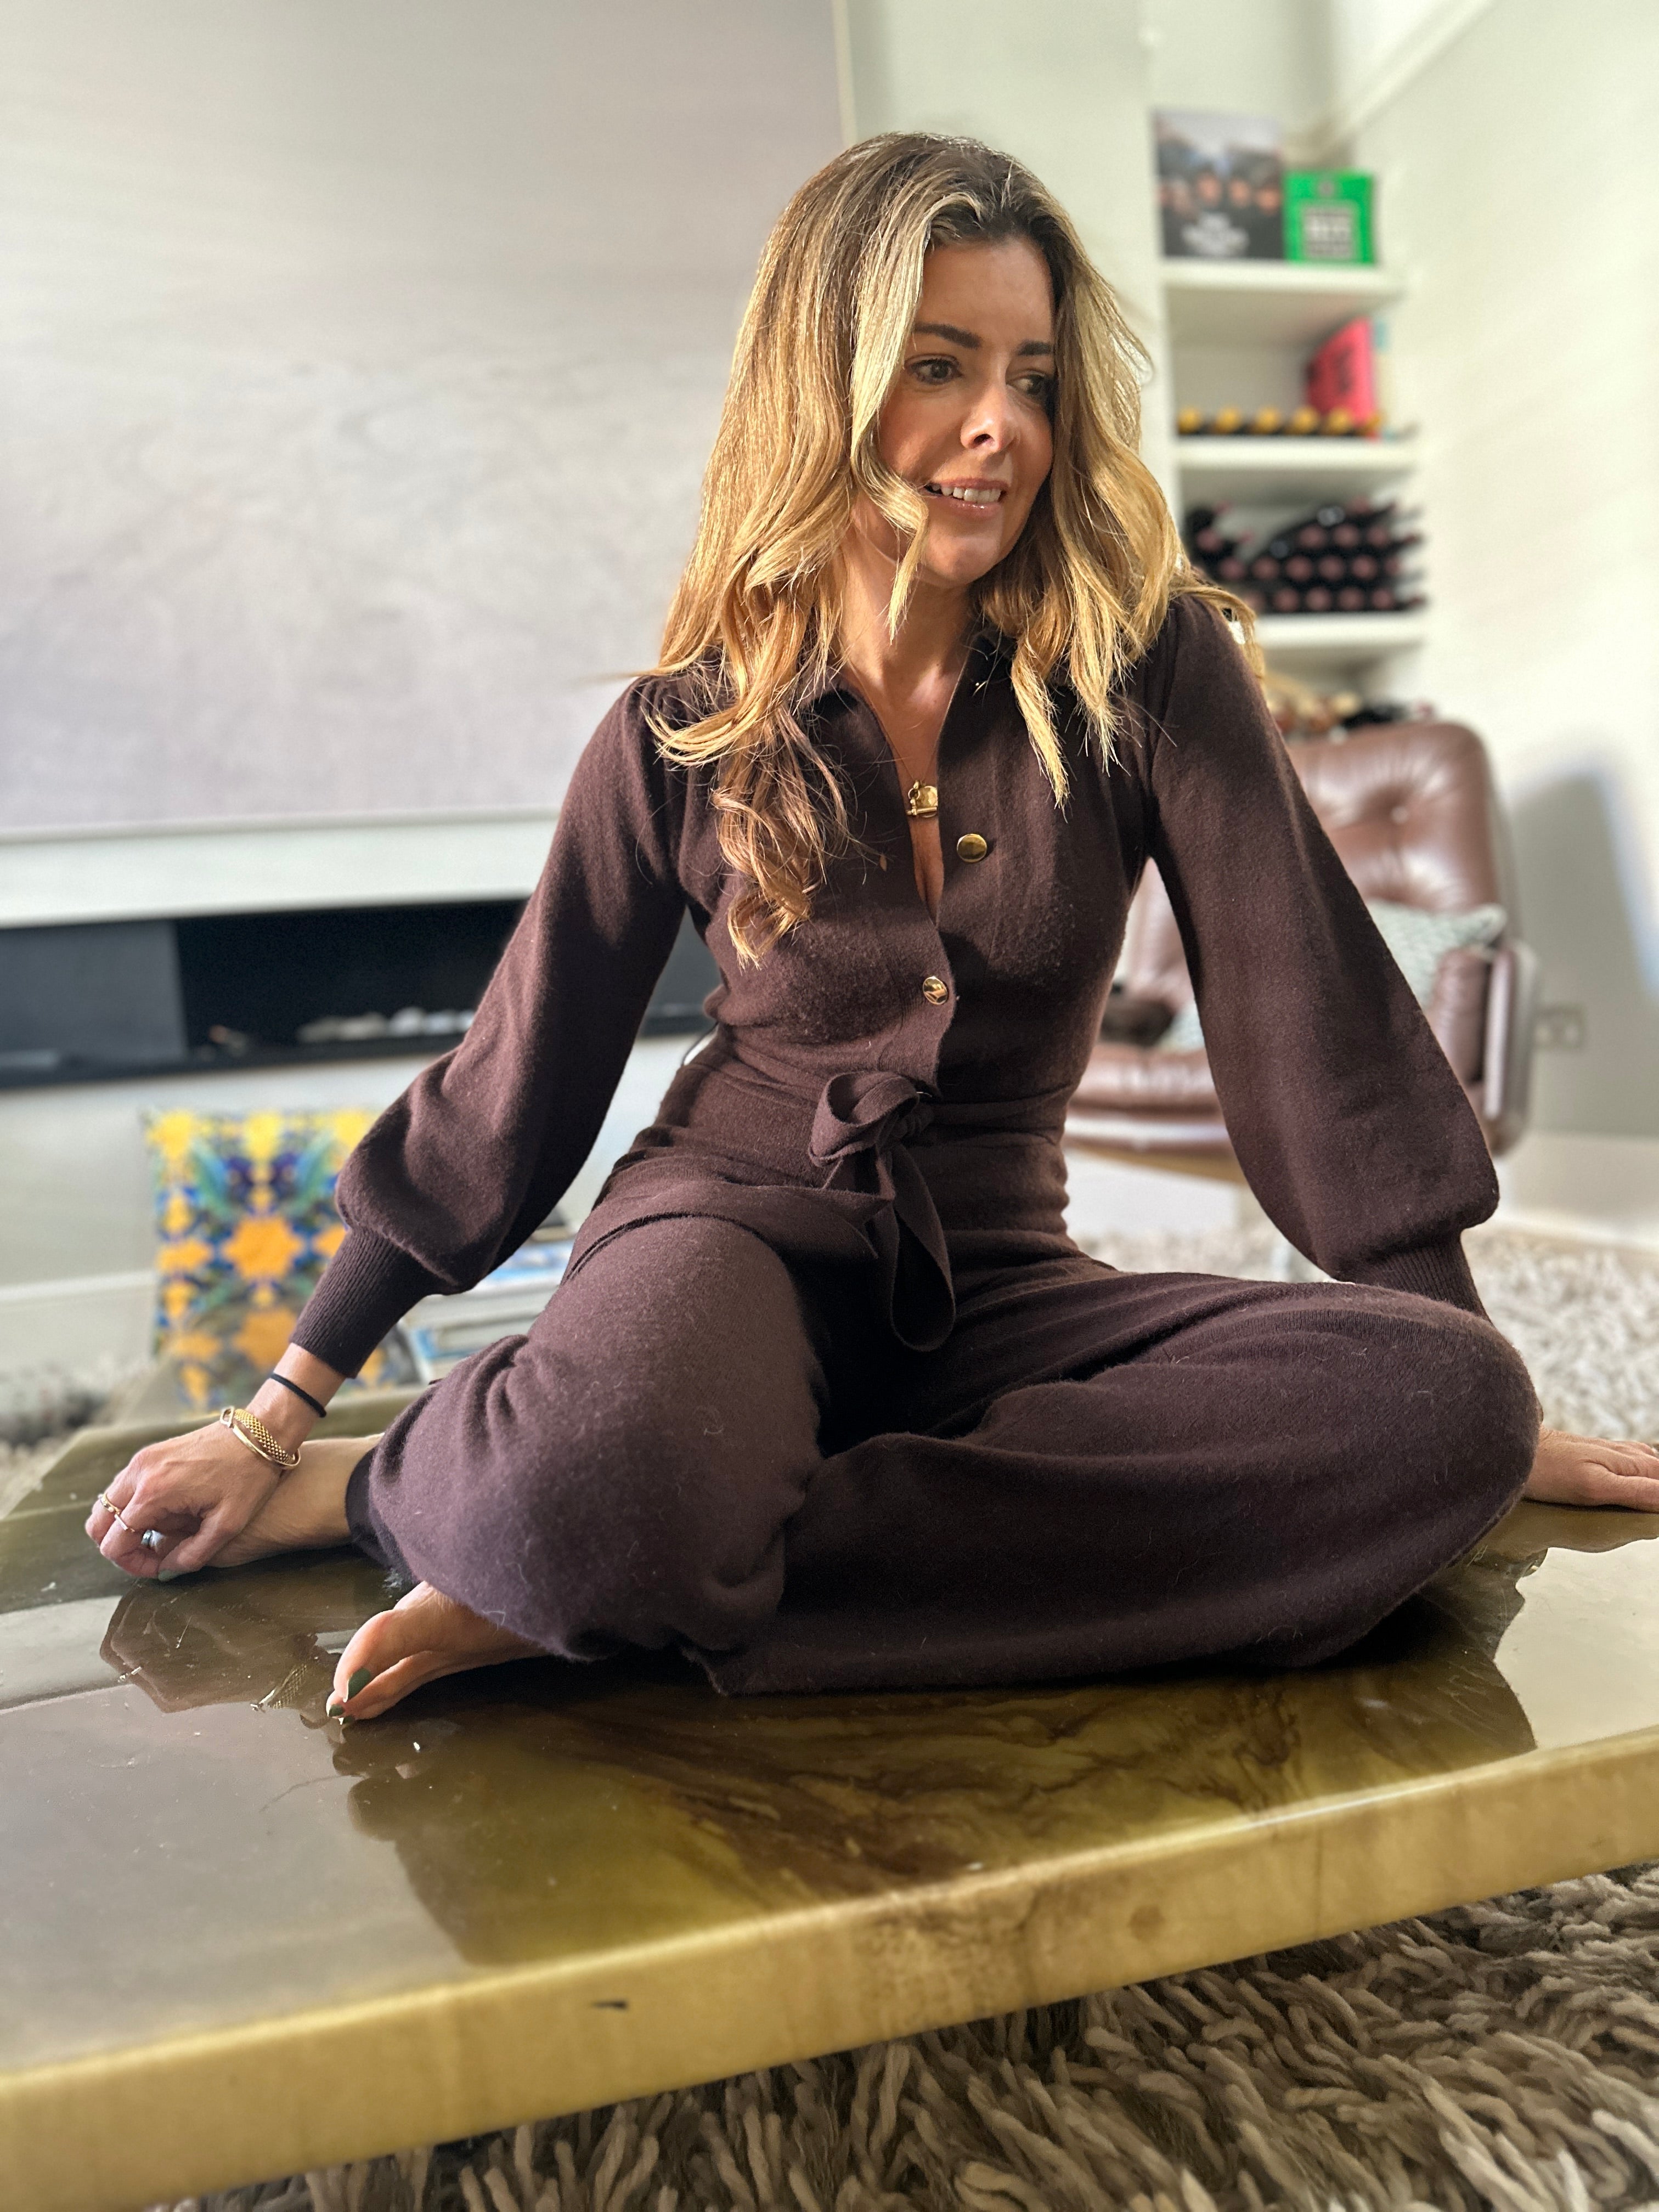 The LYRA in Chocolate Cashmere - Rock the Jumpsuit